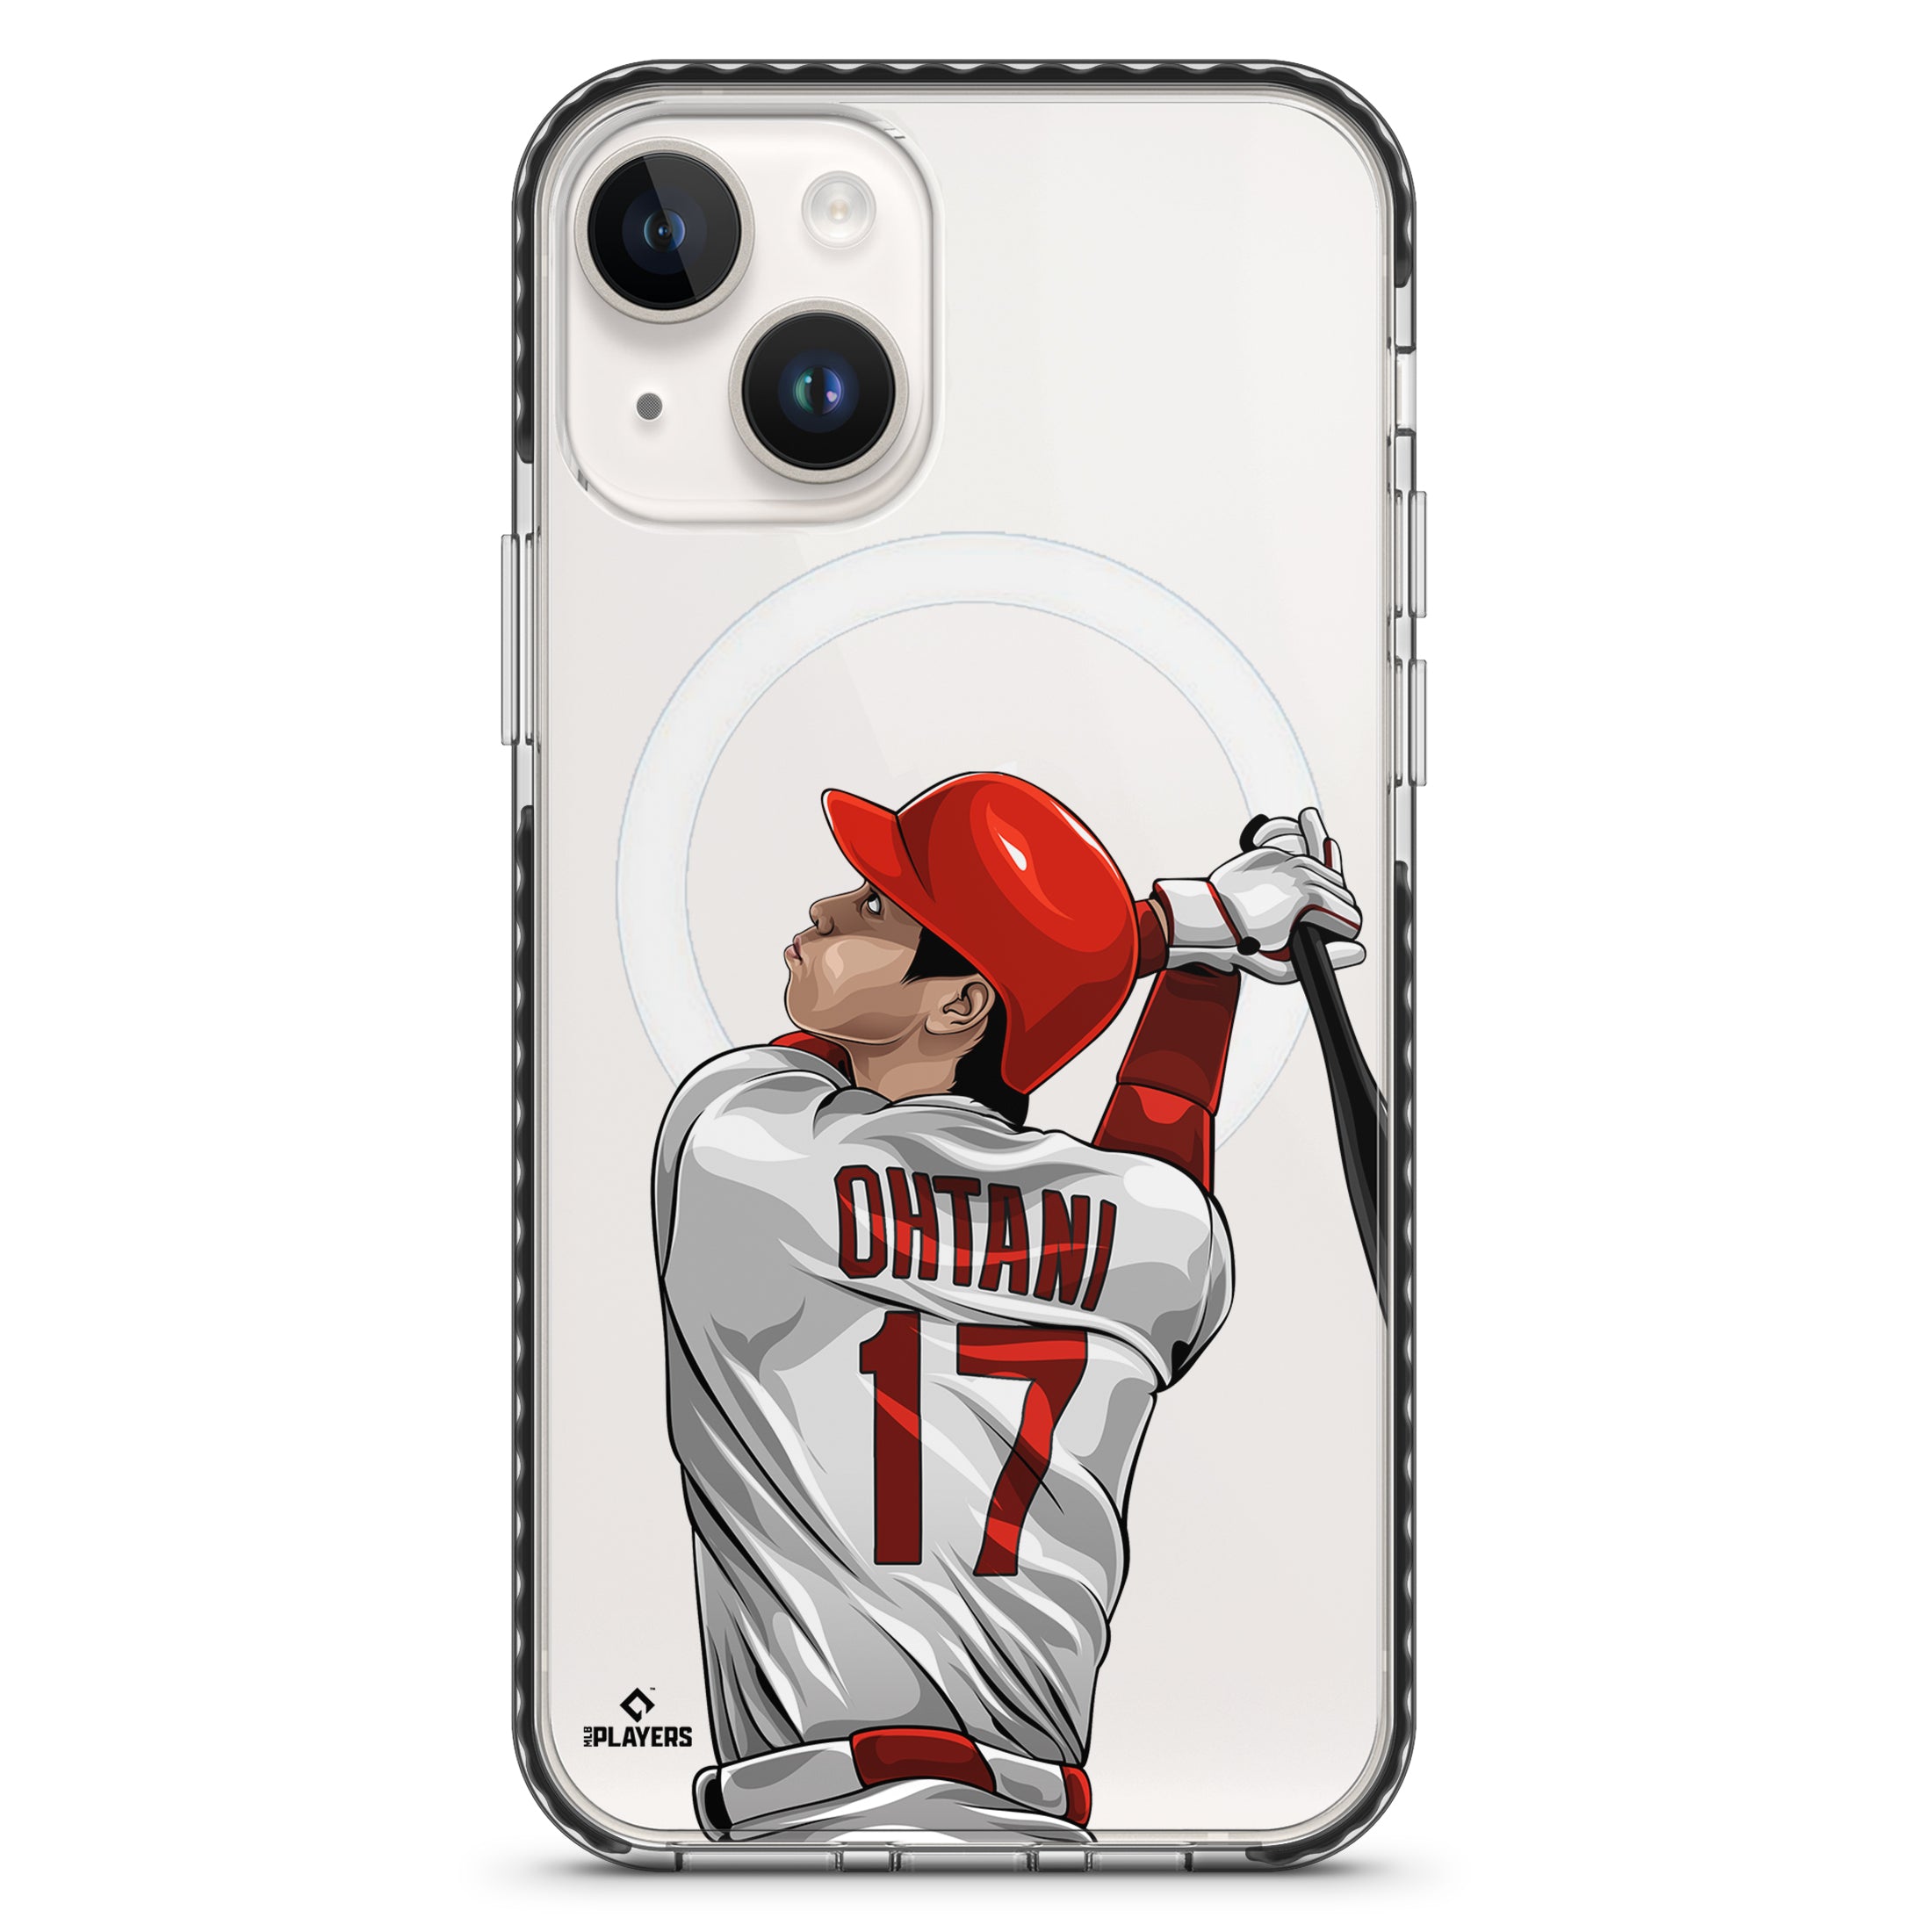 Ohtani Clear Series 2.0 Phone Case